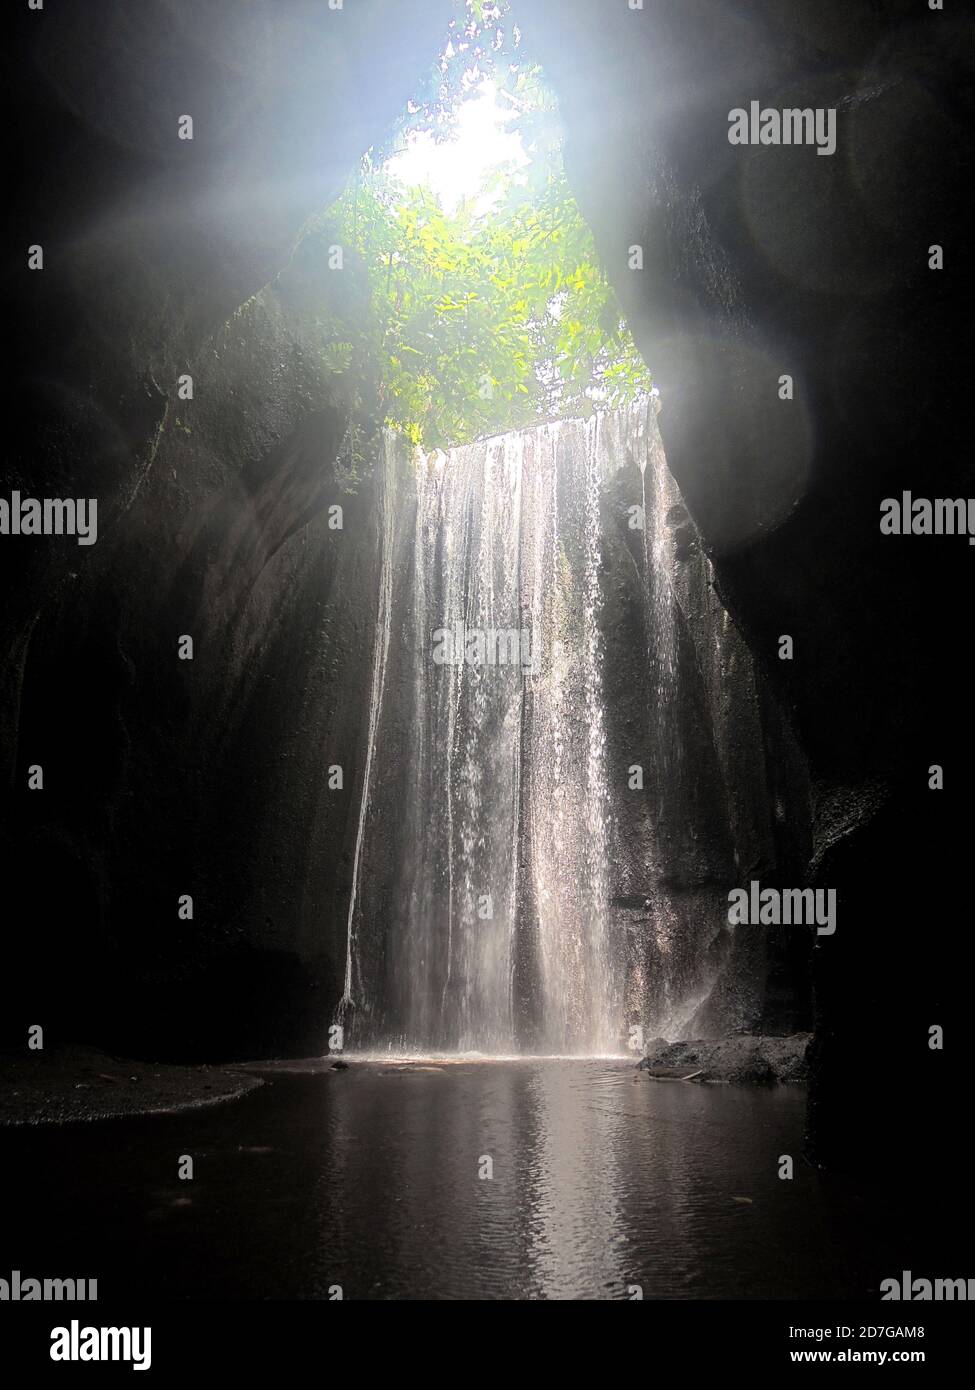 A beautiful waterfall inside a cave in Bali. Stock Photo